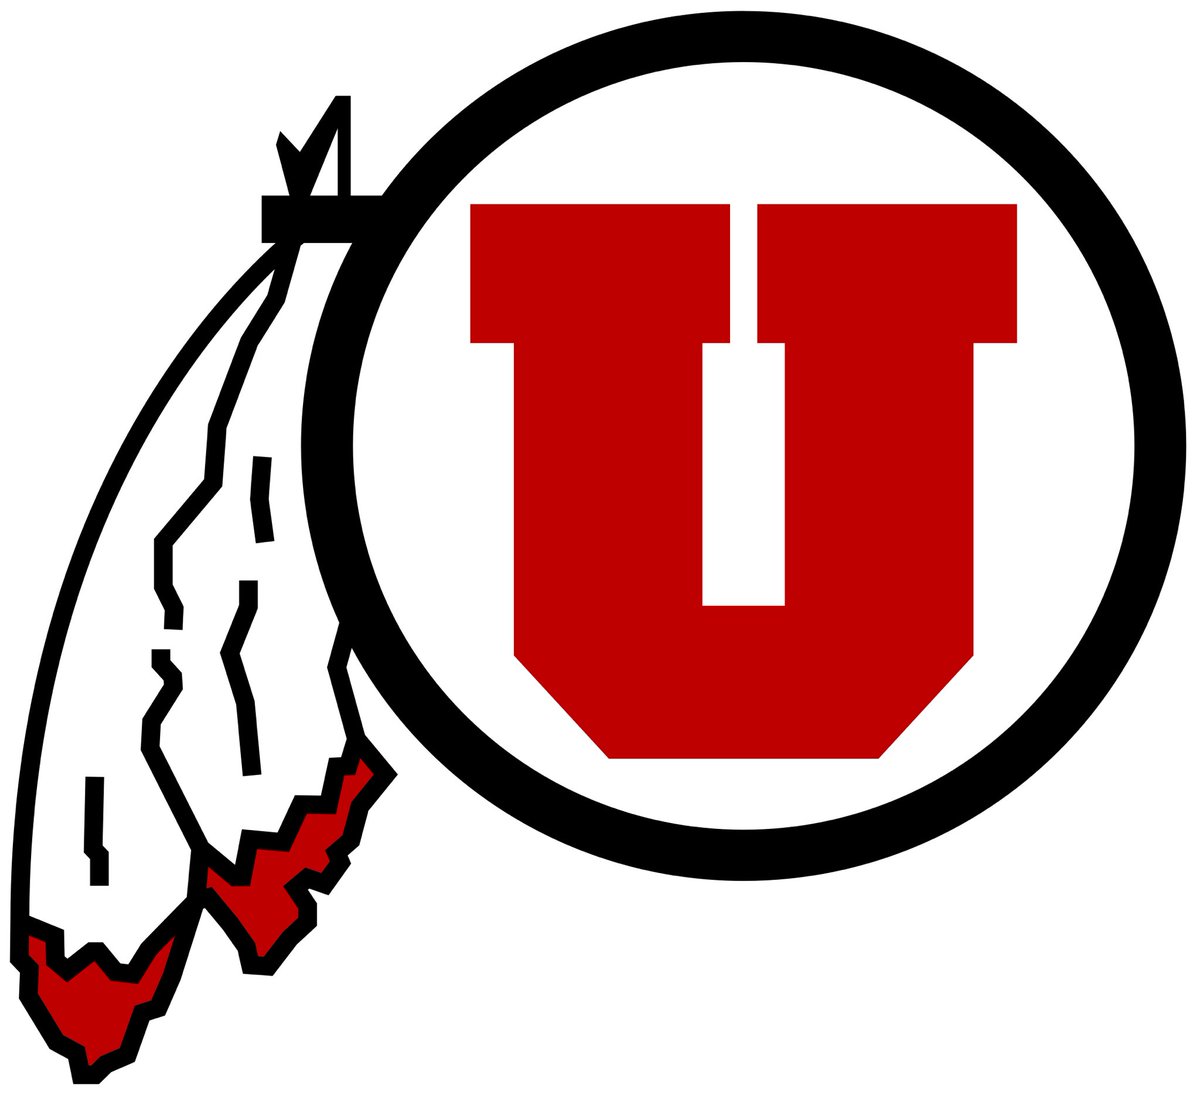 All Glory To My Heavenly Father. 
After a great call with Coach Scalley, I’ve been Offered a PWO to the University Of Utah! Go Utes ❤️
#BECAUSEOFHIM 🙏🏽

@Utah_Football @RSNBUtes @CoachPowell99 @Coach_Pala @granger_lancers